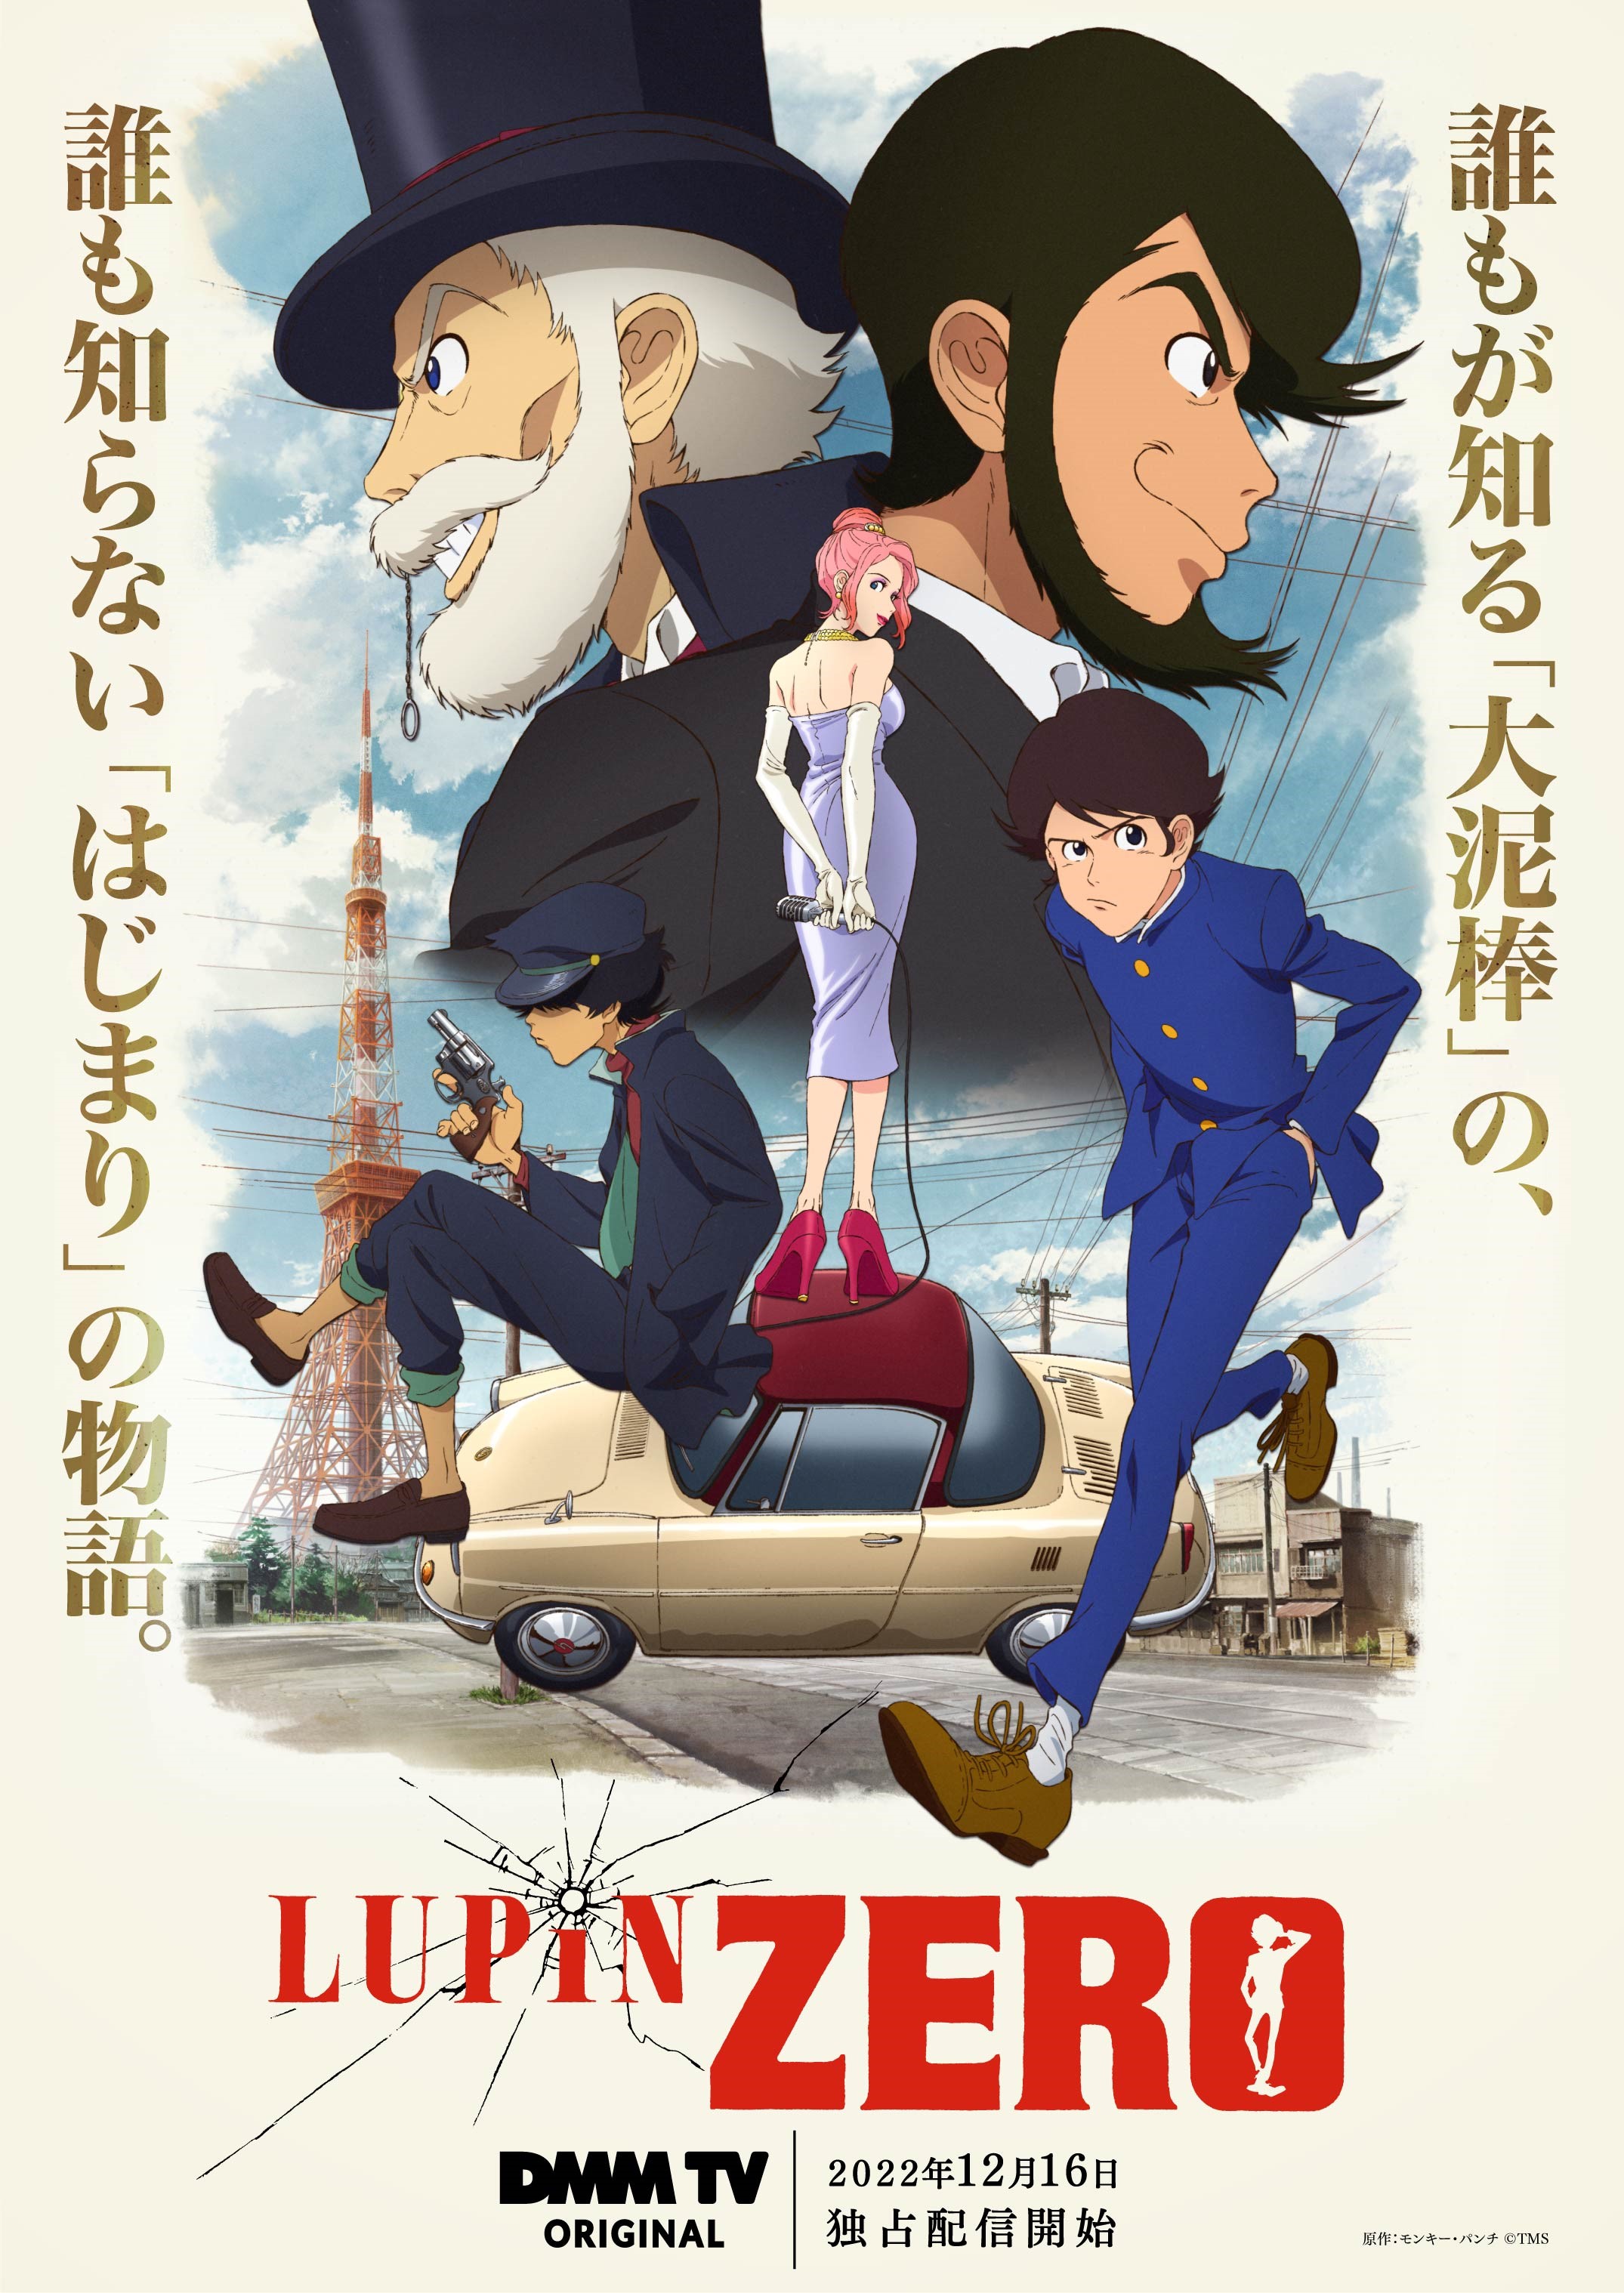 Watch Two Special Episodes of LUPIN THE 3RD Part 2 on HIDIVE This